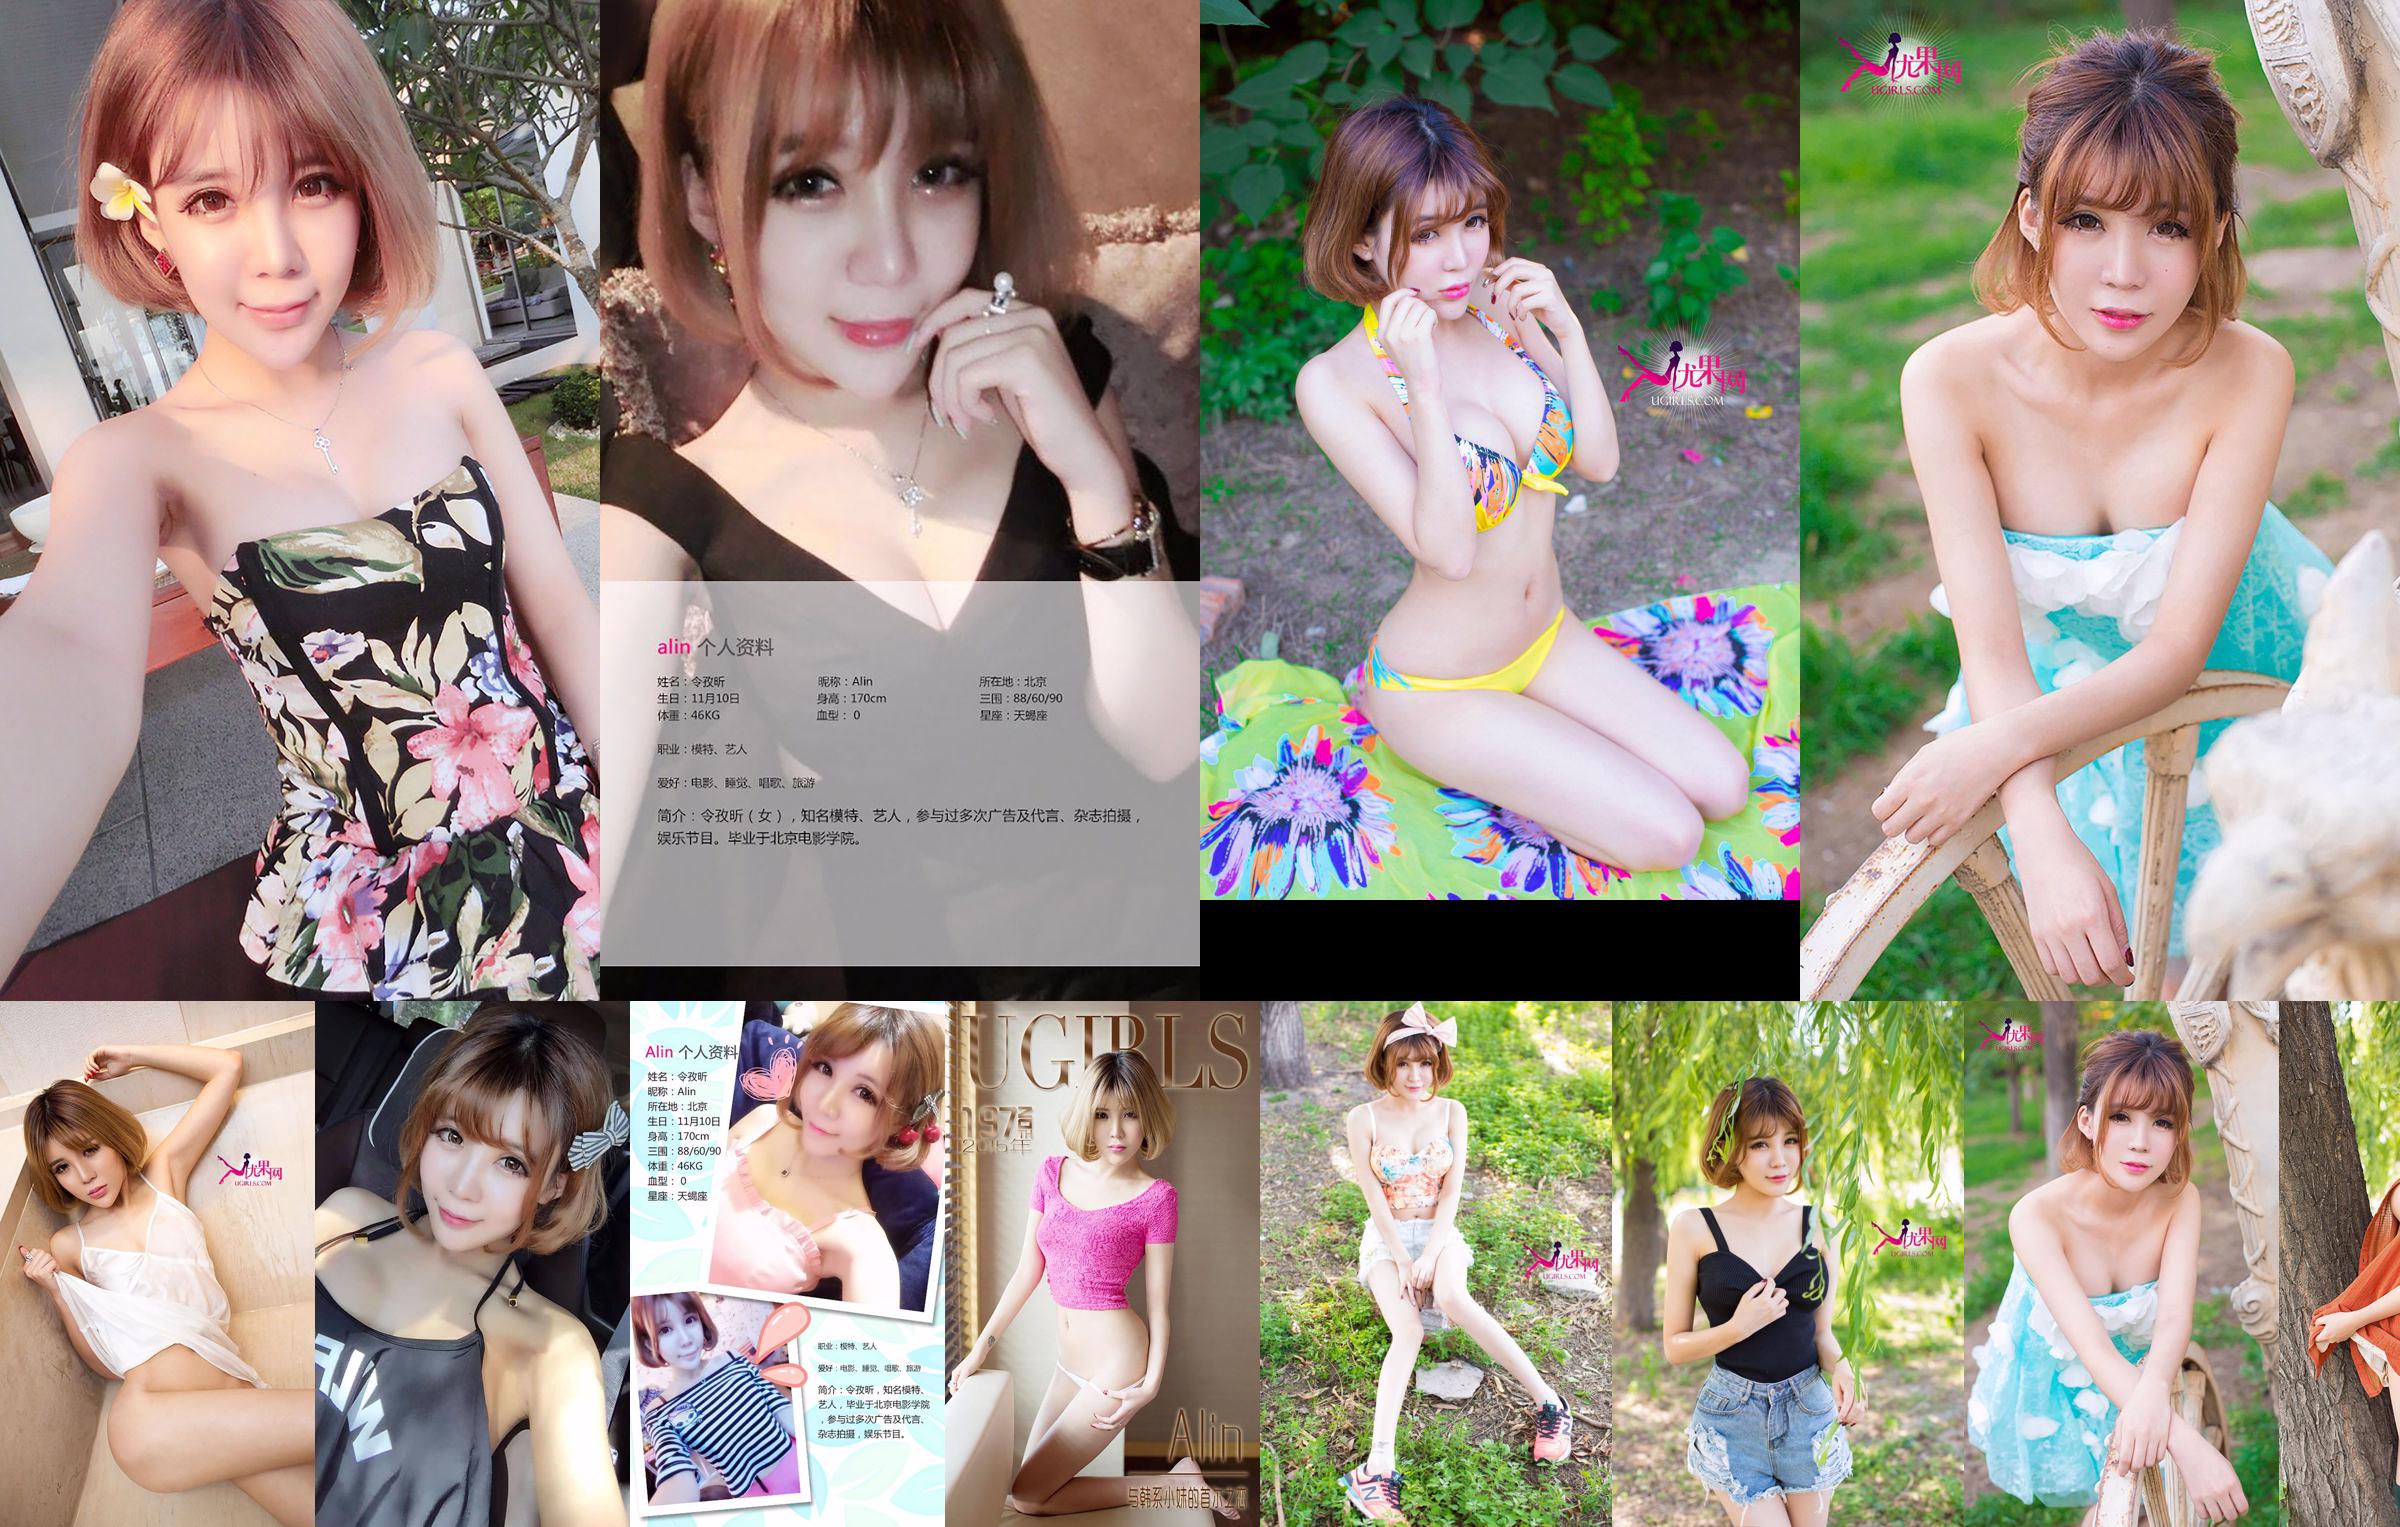 Ling Zixin Alin "Sunshine on the Edge, Bright Smiling Face" [爱 优 物 Ugirls] No.054 No.330a1a Pagina 2